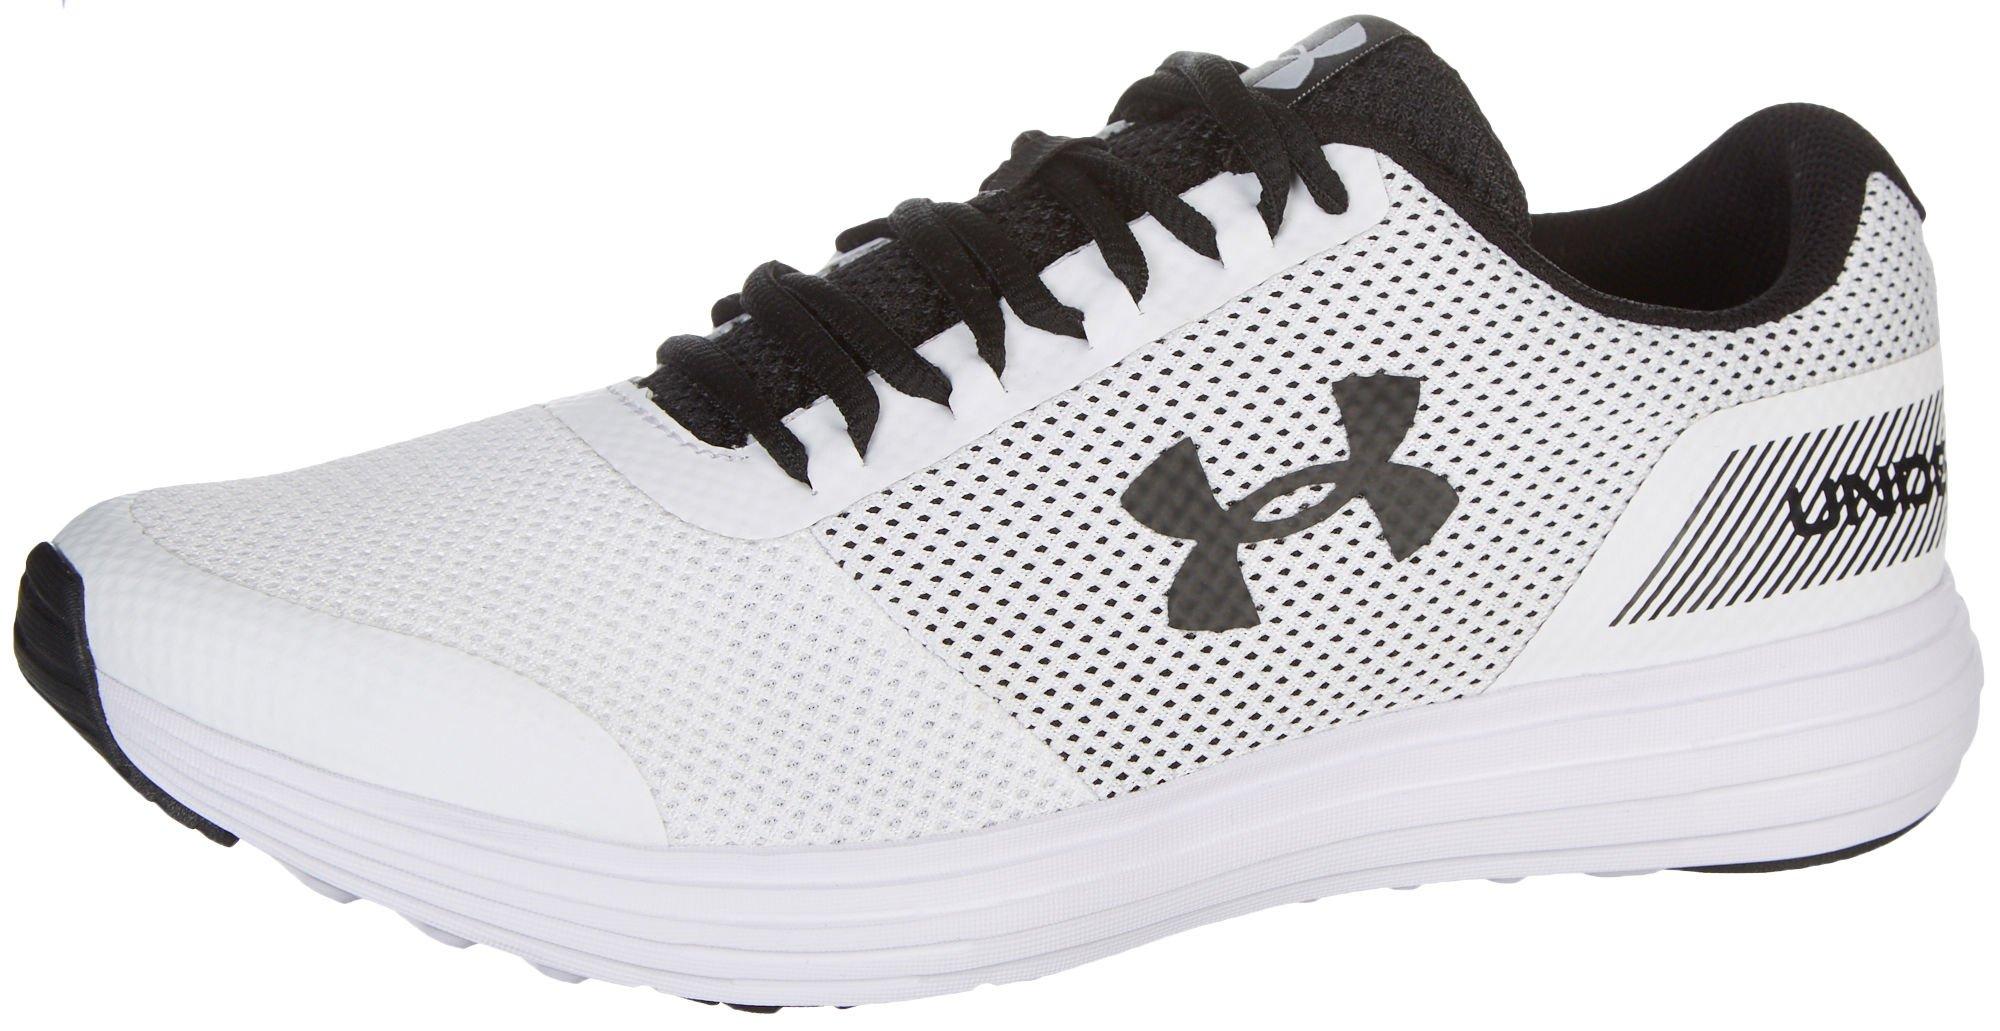 Under Armour Mens Surge Running Shoes | Bealls Florida